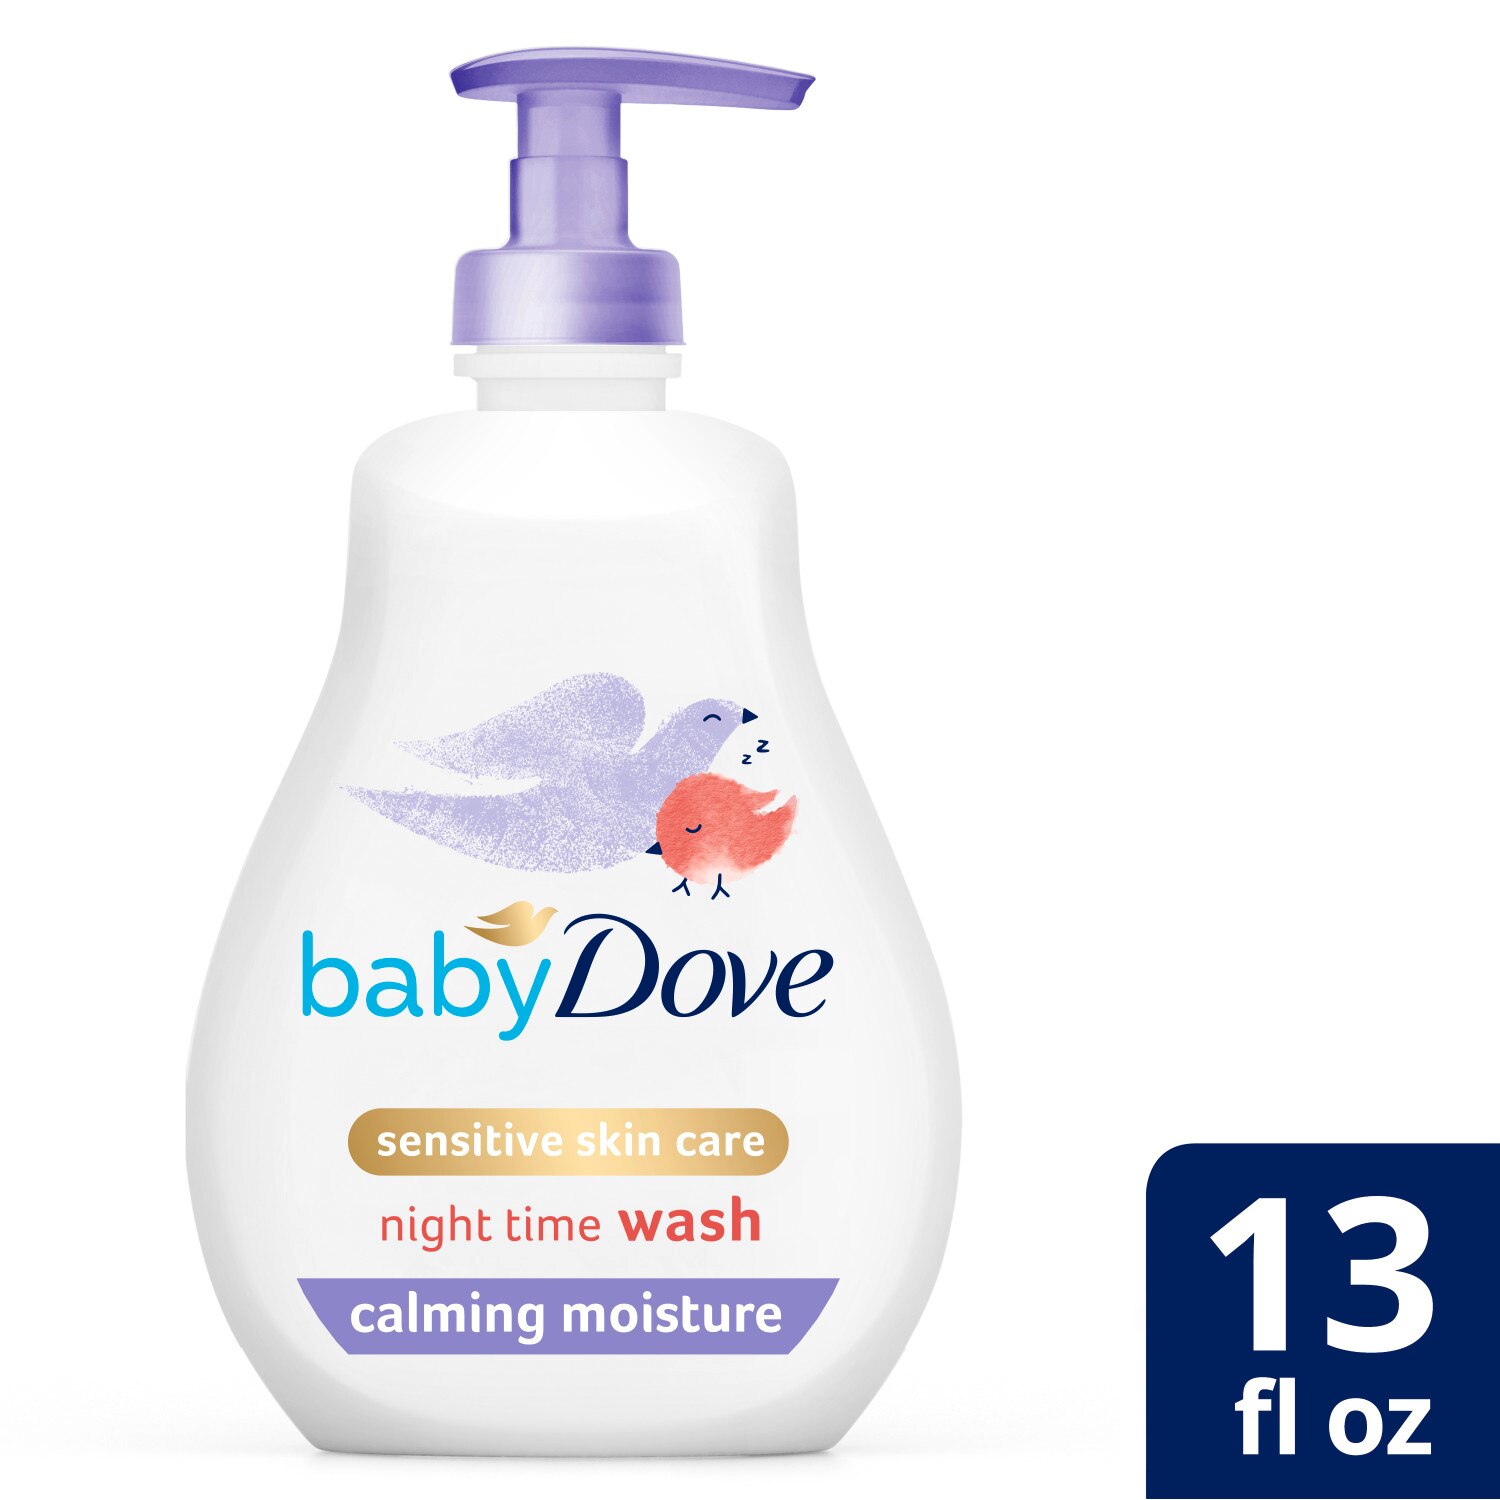 Baby Dove Sensitive Skin Care Hypoallergenic and Tear-Free, Calming Moisture Wash, 13 oz